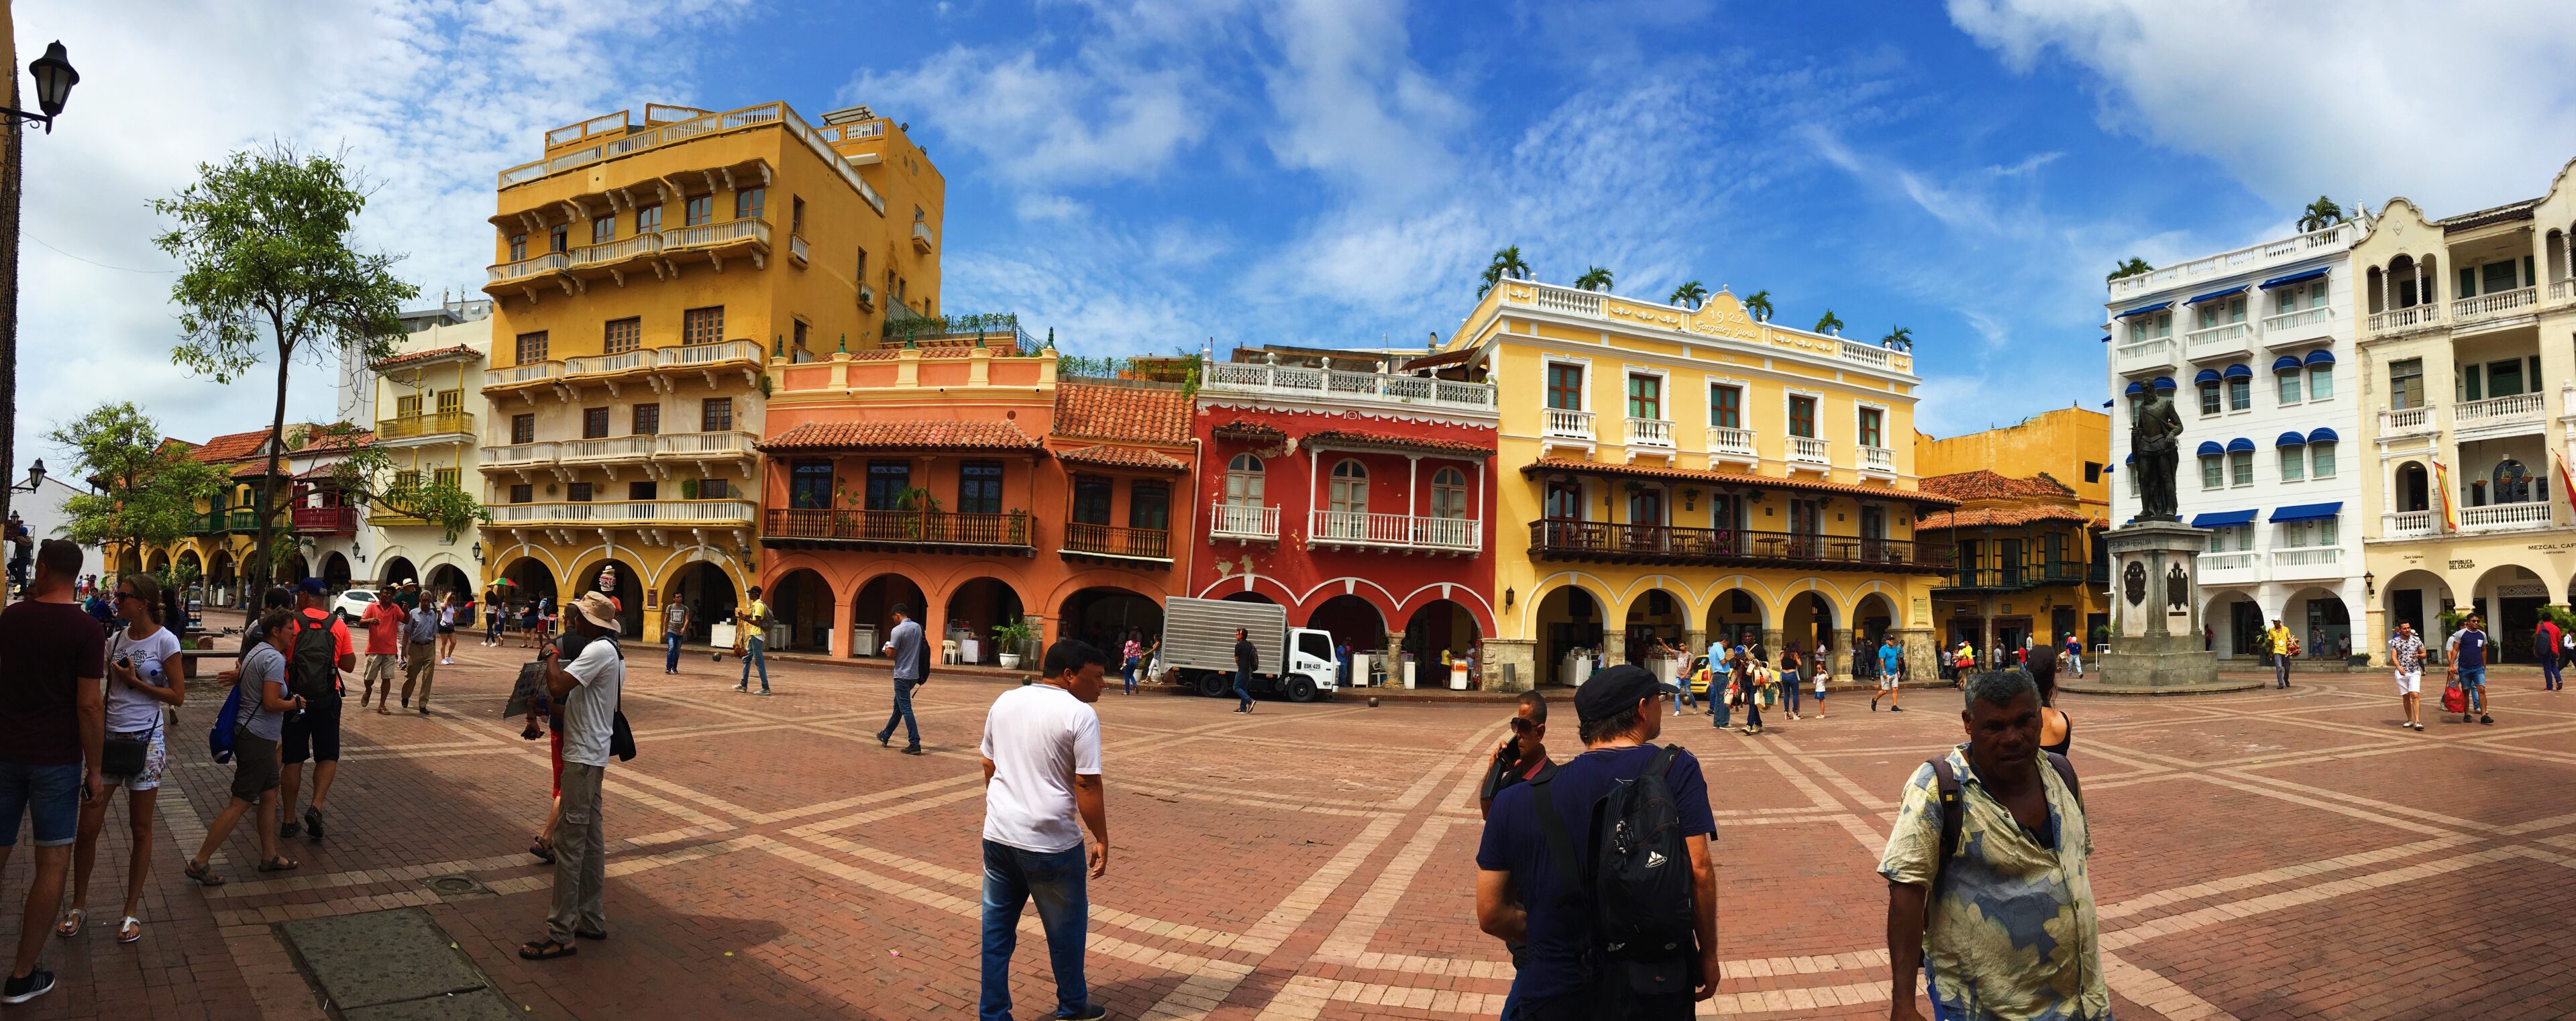 lcm-liveclothesminded-colombia-travel-vacation-cartagena-walled city-old town-south america